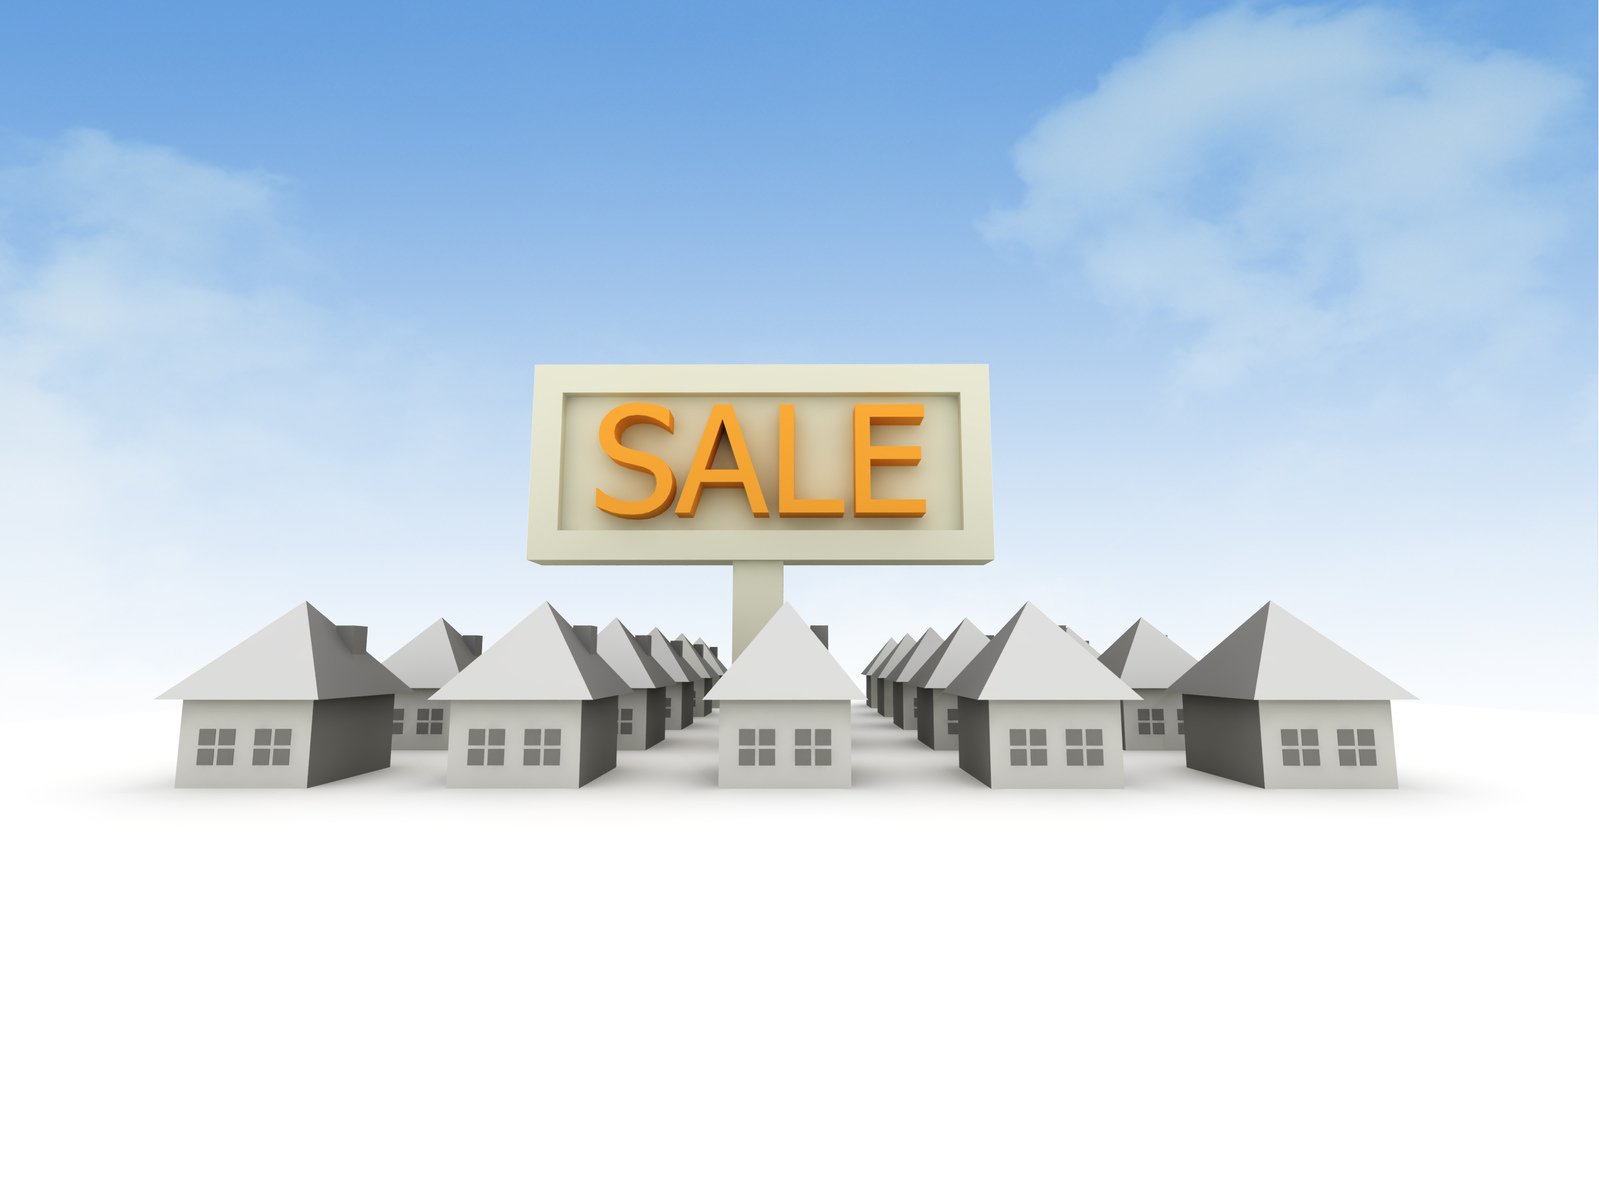 houses sit in front of a sale sign